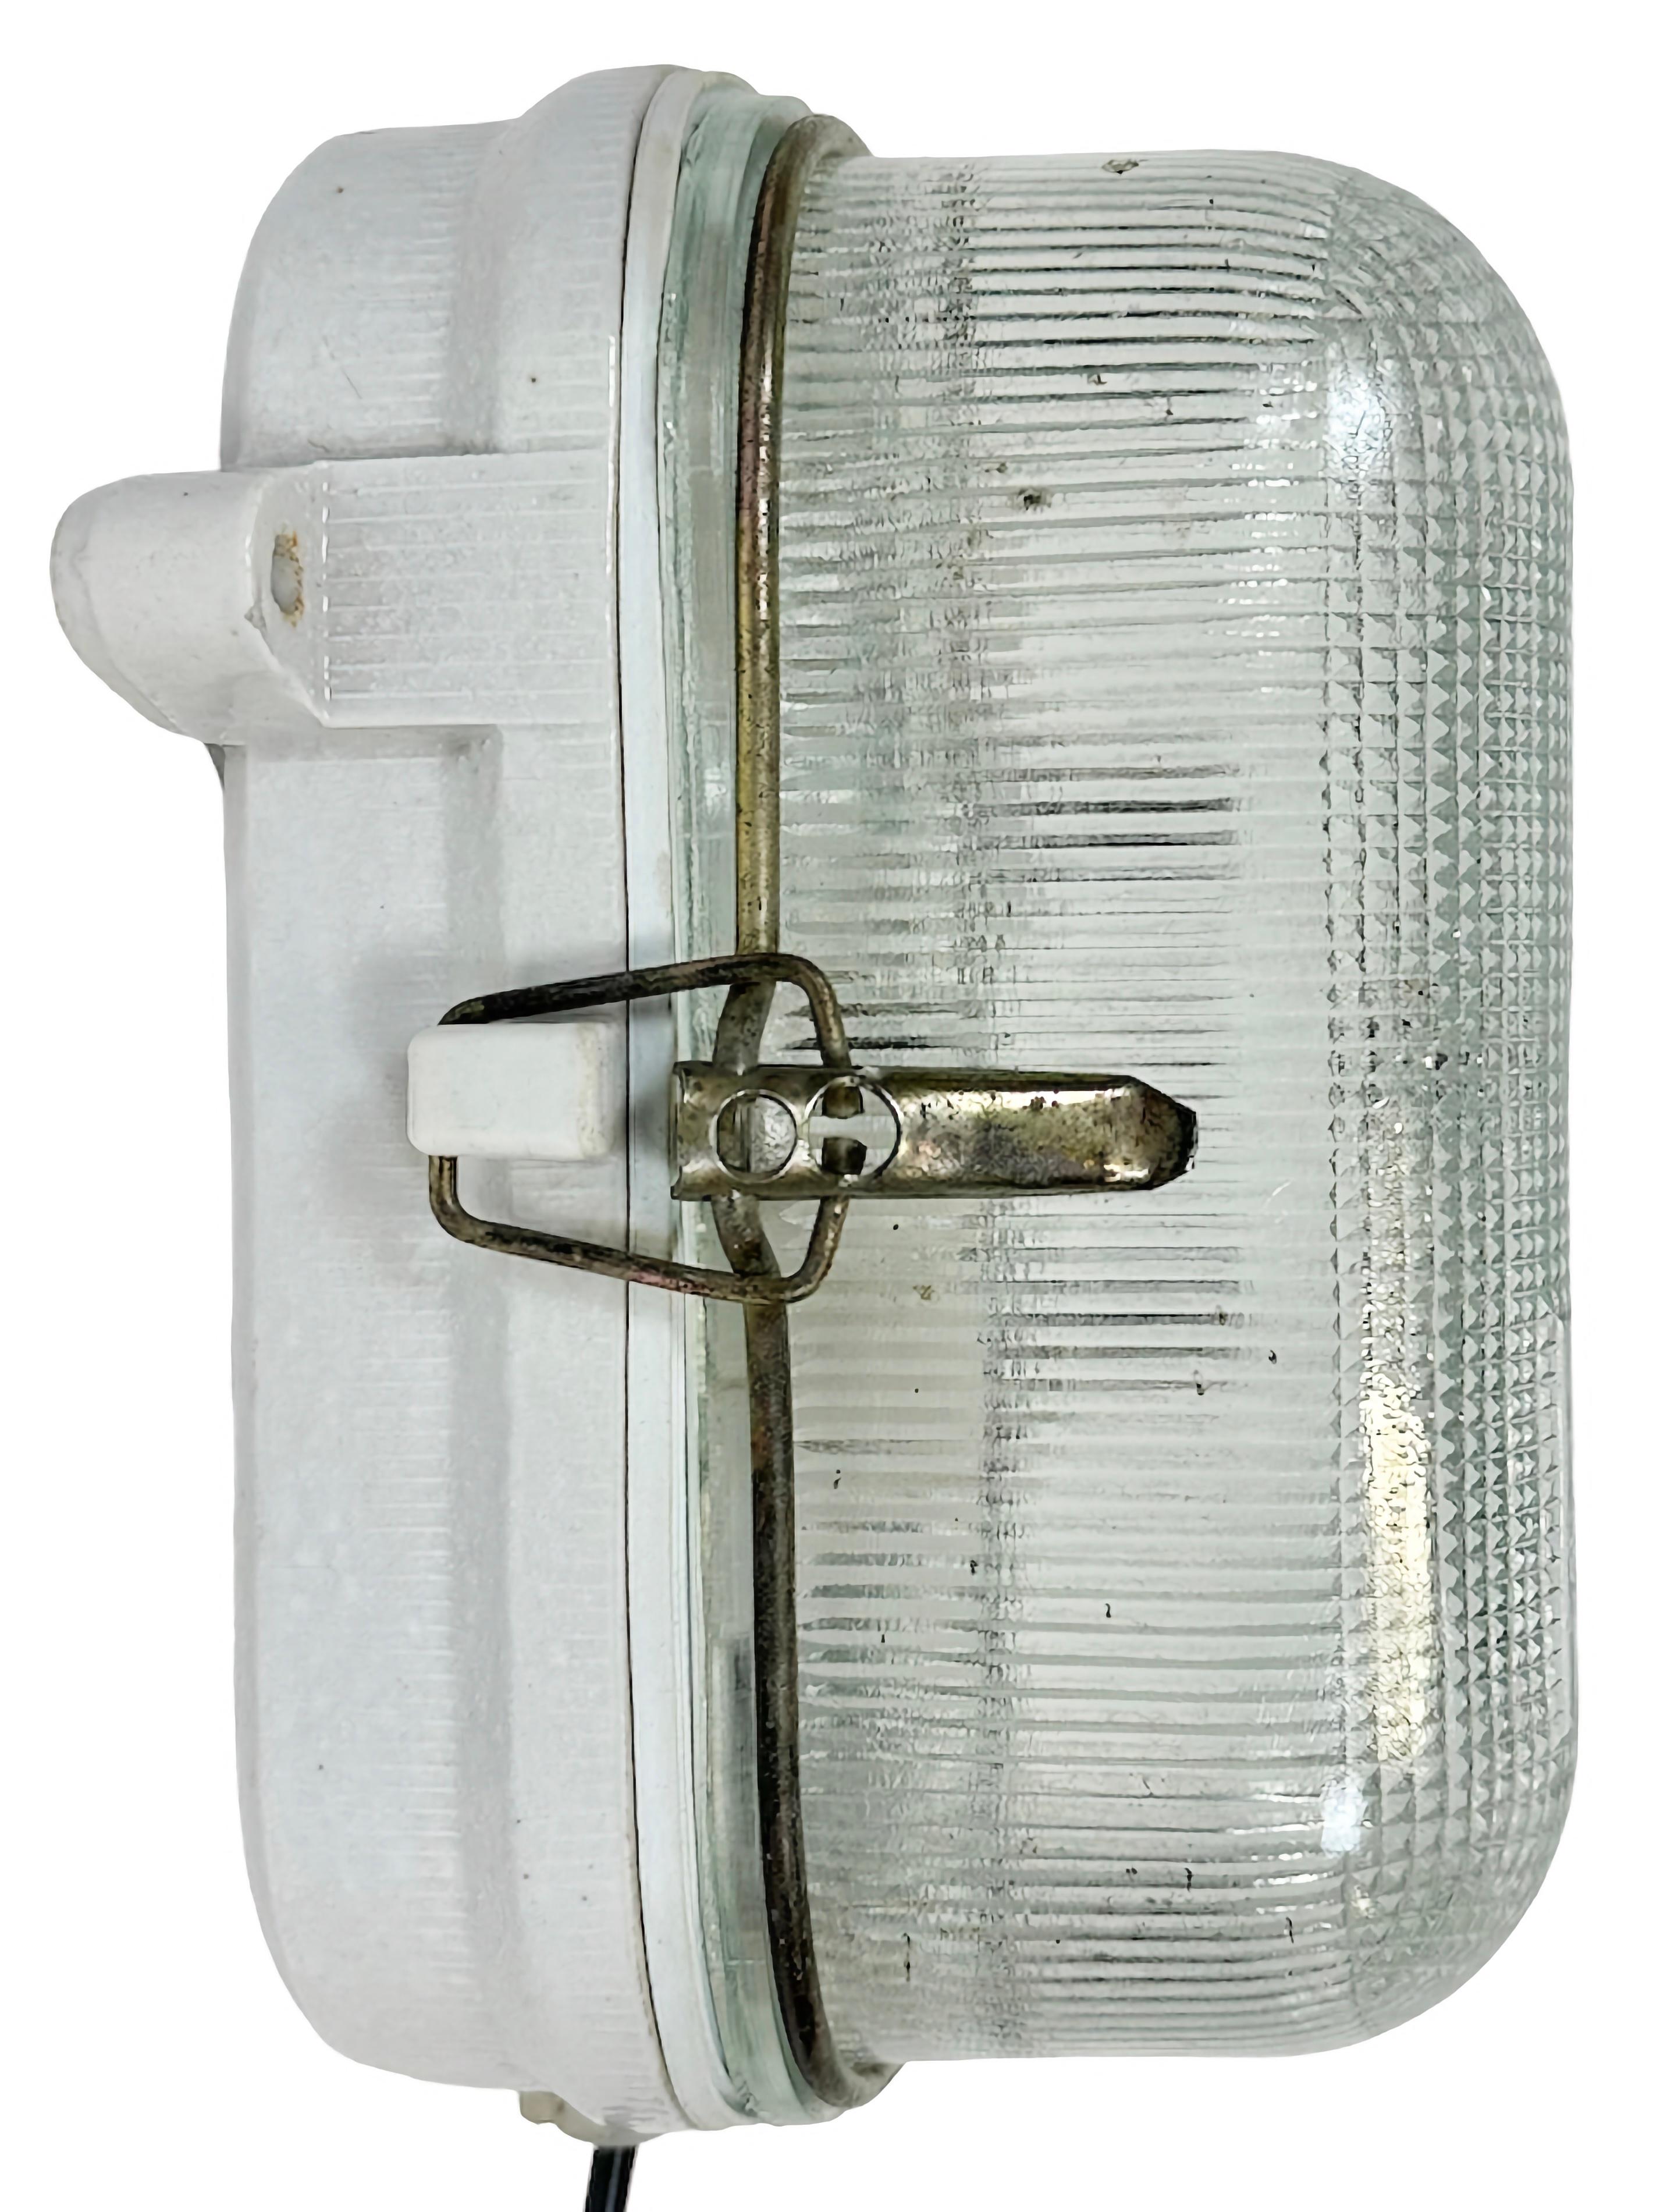 Vintage industrial light made in former Soviet Union during the 1970s.It features a white porcelain body and a ribbed glass cover. The socket requires E27/ E26 light bulbs. New wire. The weight of the light is 2 kg.